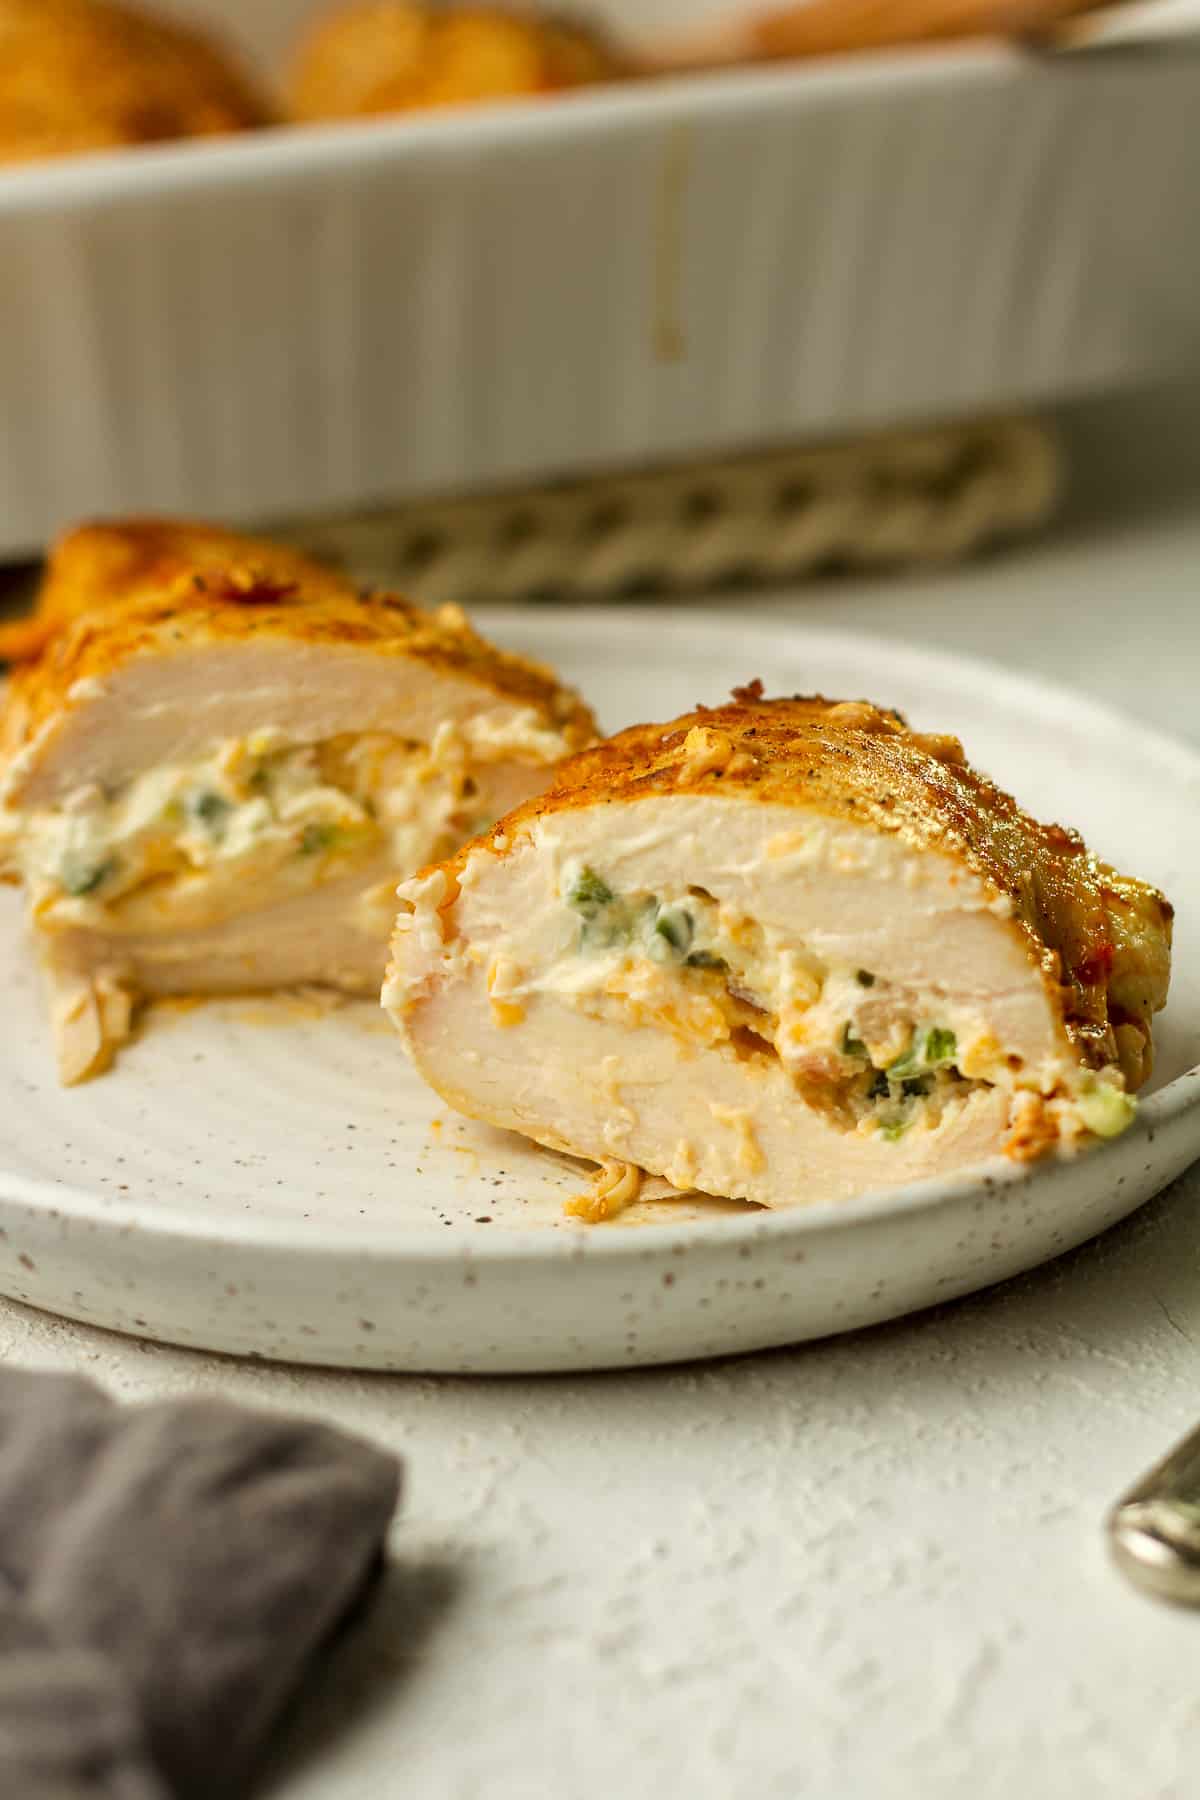 Side view of a halved stuffed chicken breast.